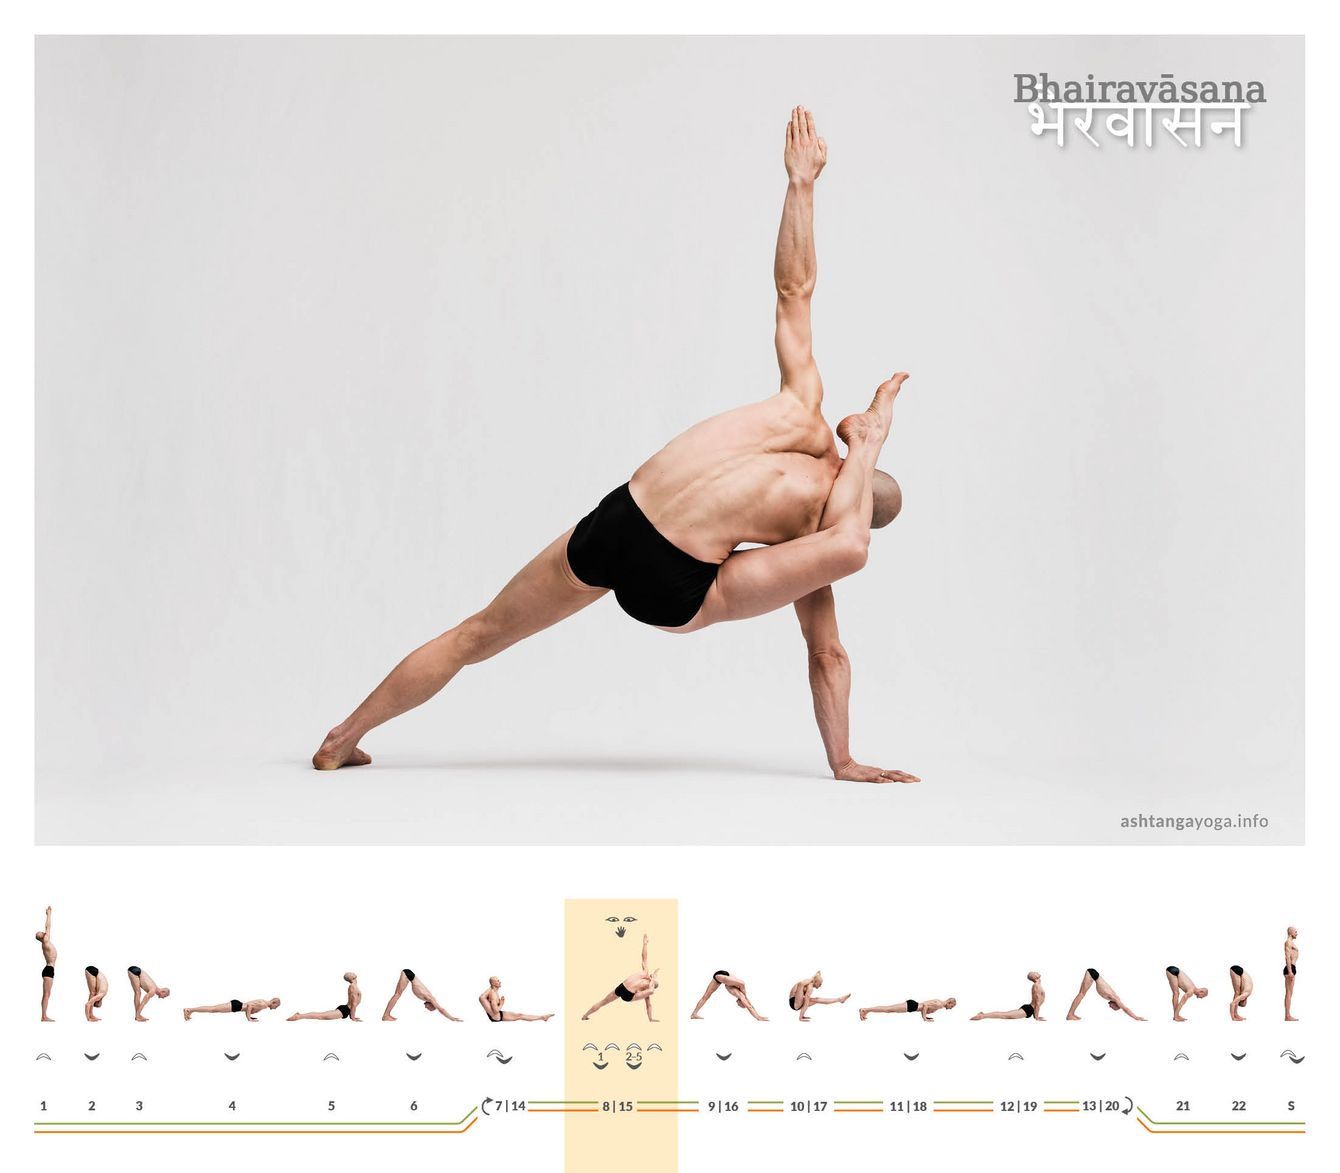 The posture named after Bhairava combines a side plank with another opportunity to place the foot behind the head.